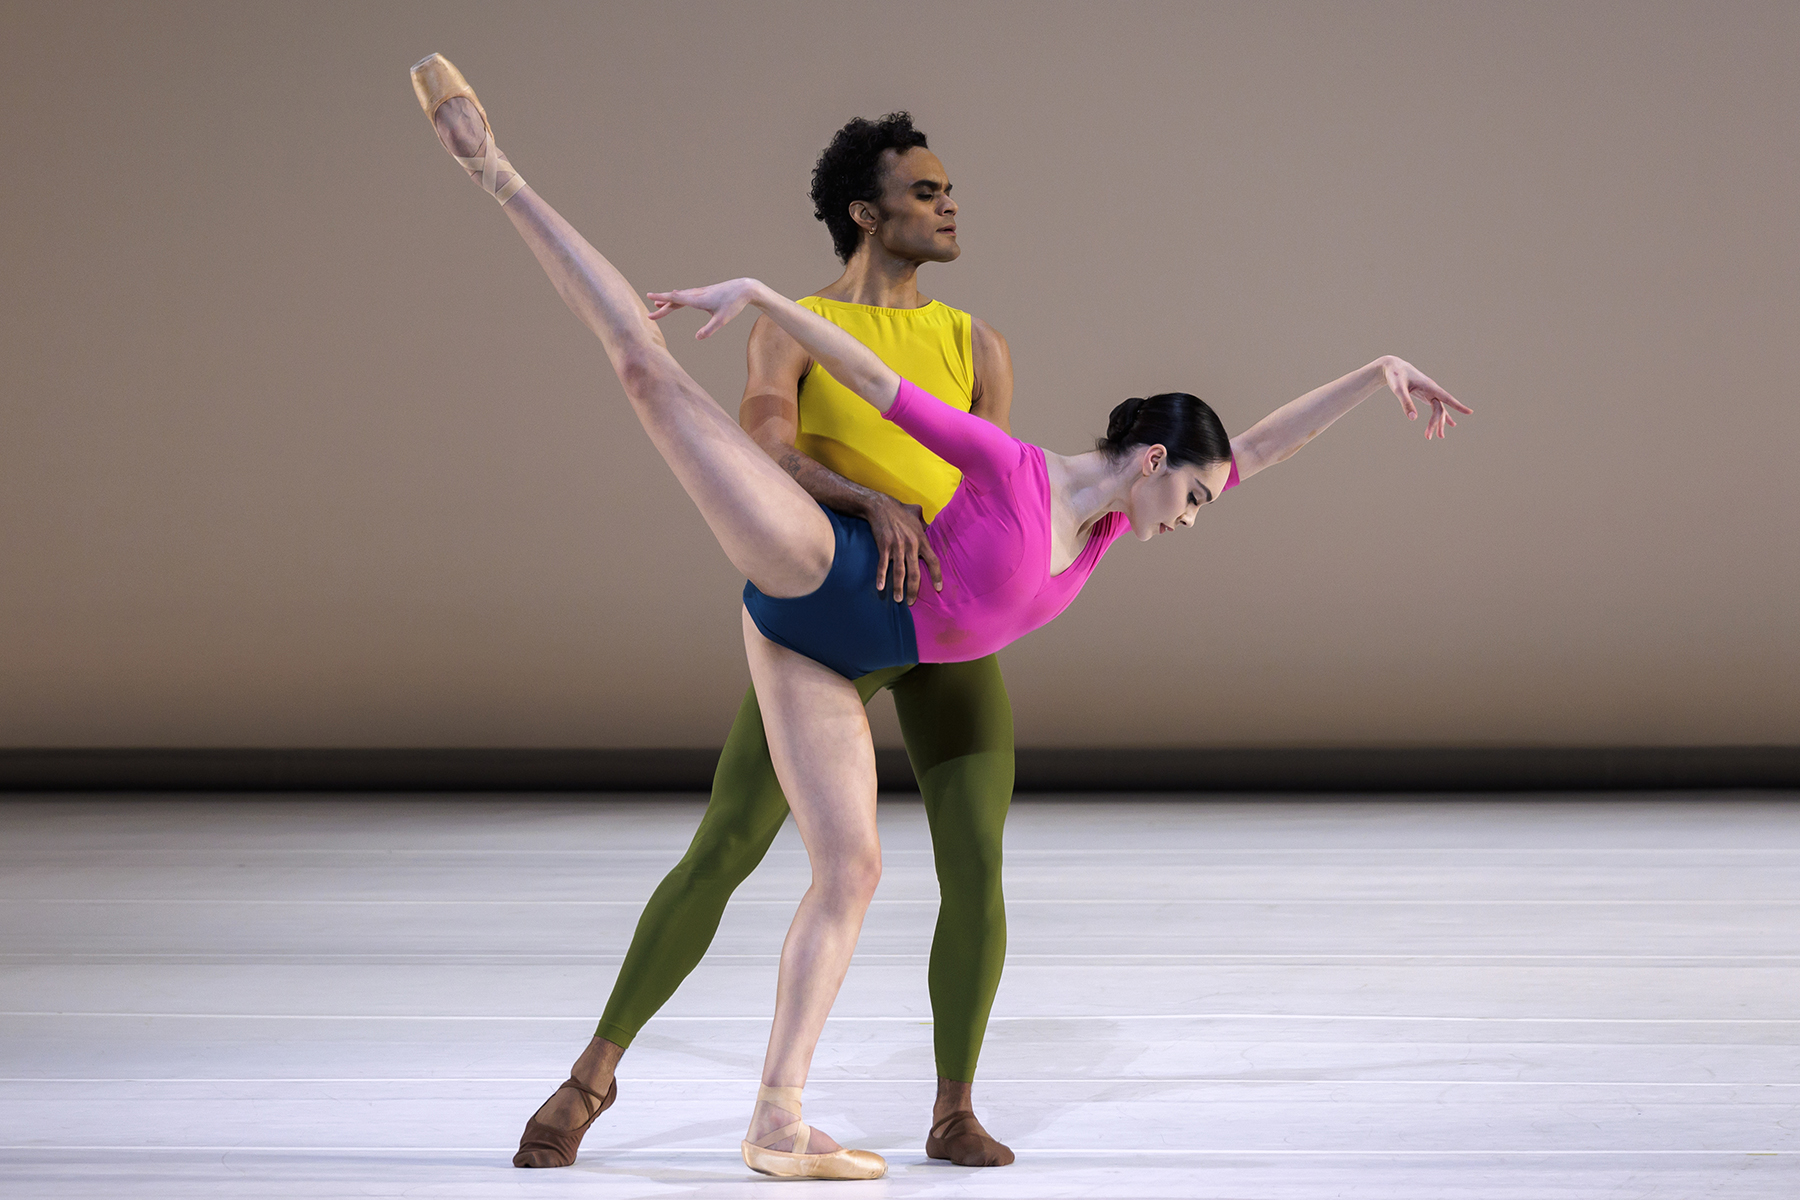 Mira Nadon and Taylor Stanley in "Copland Dance Episodes" at Lincoln Center in New York City.